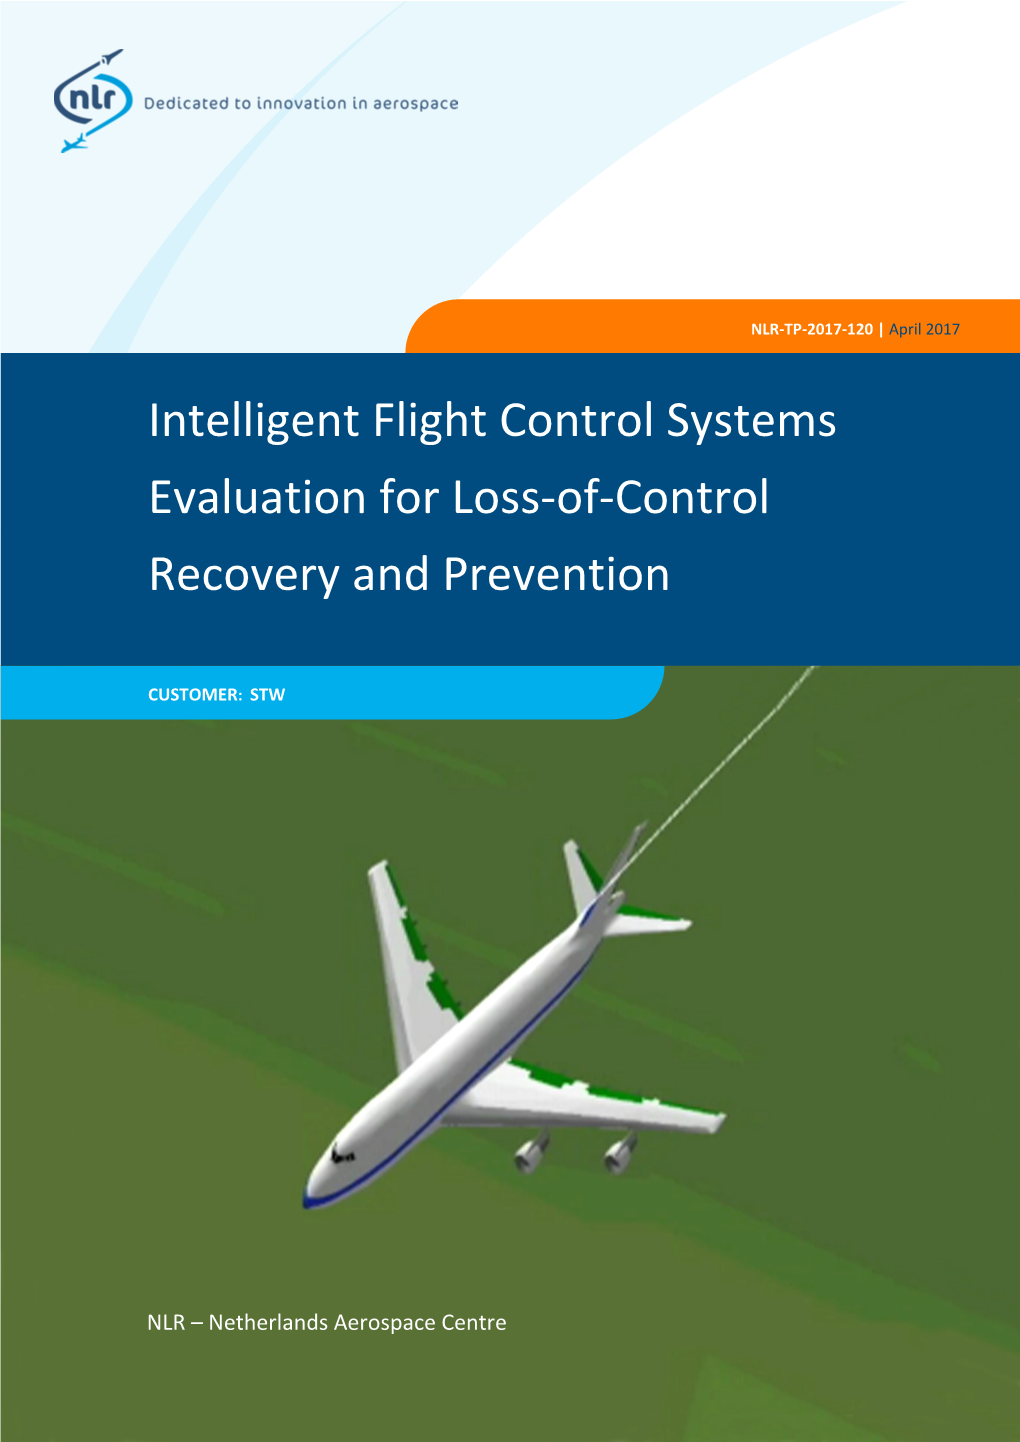 Intelligent Flight Control Systems Evaluation for Loss-Of-Control Recovery and Prevention